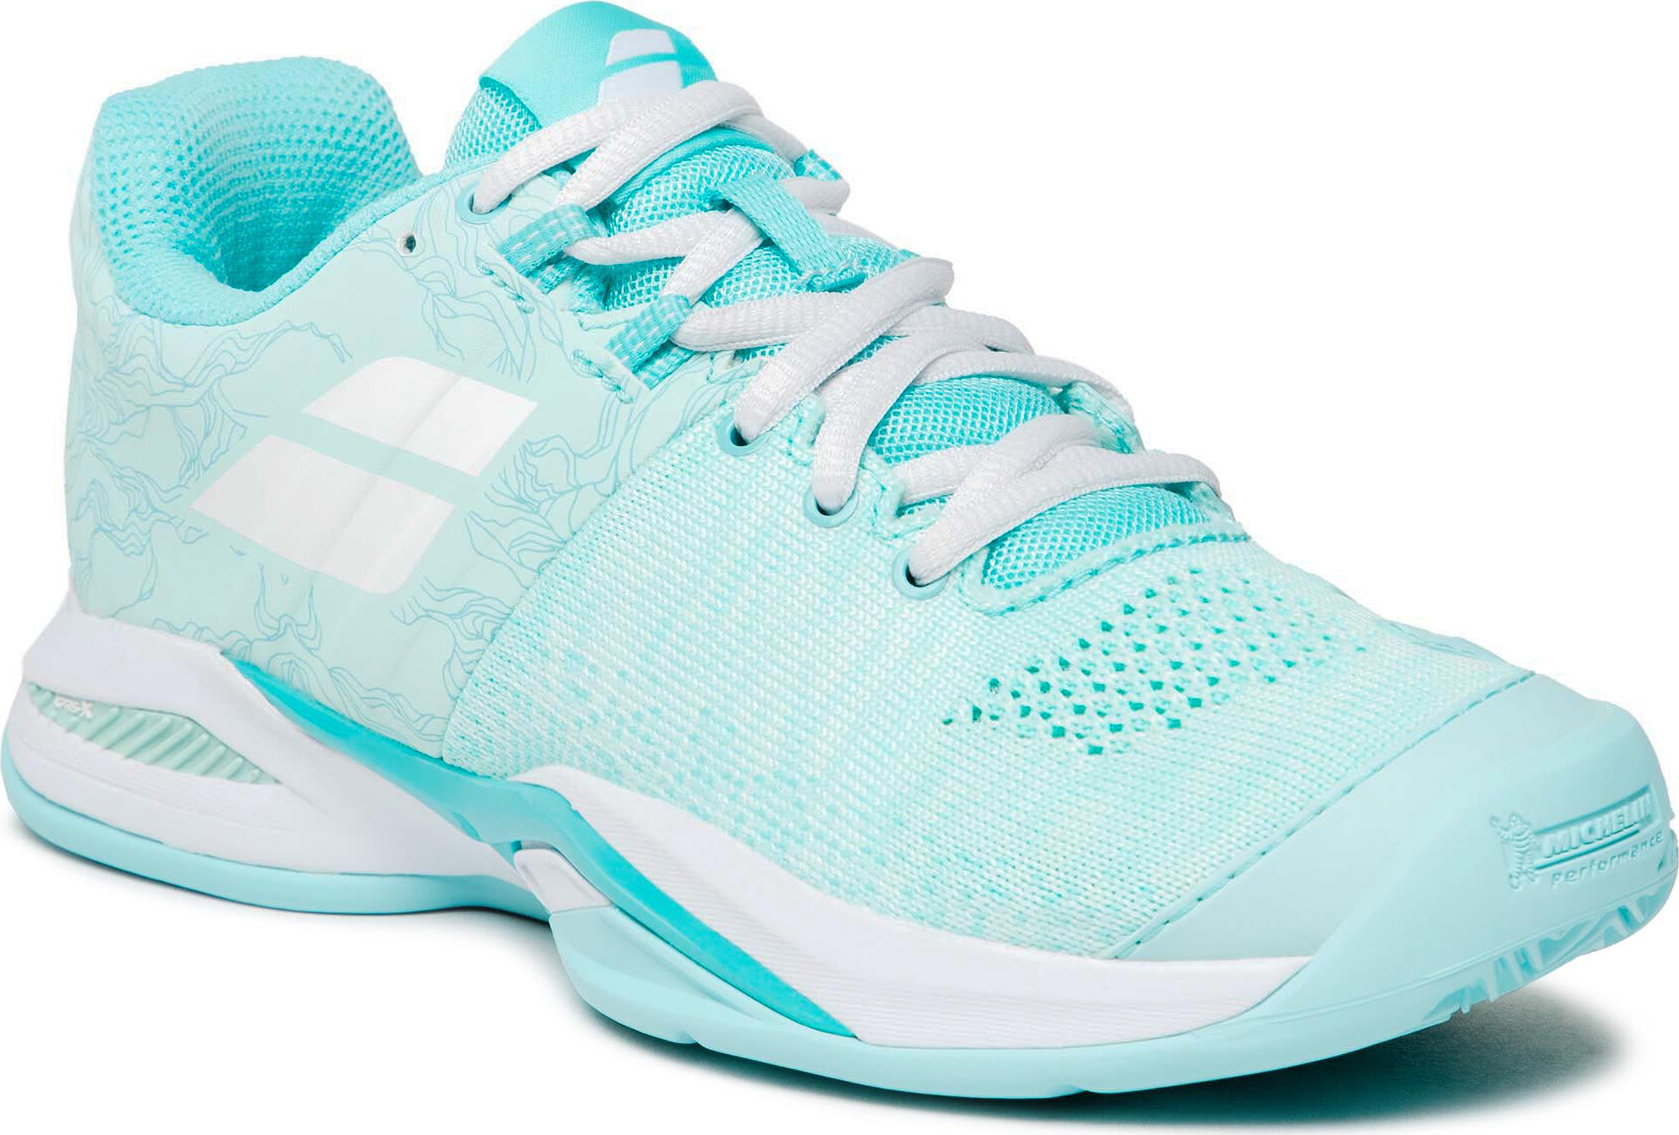 Topánky Babolat Propulse Blast Clay Women 31S22751 Tanager Turquoise